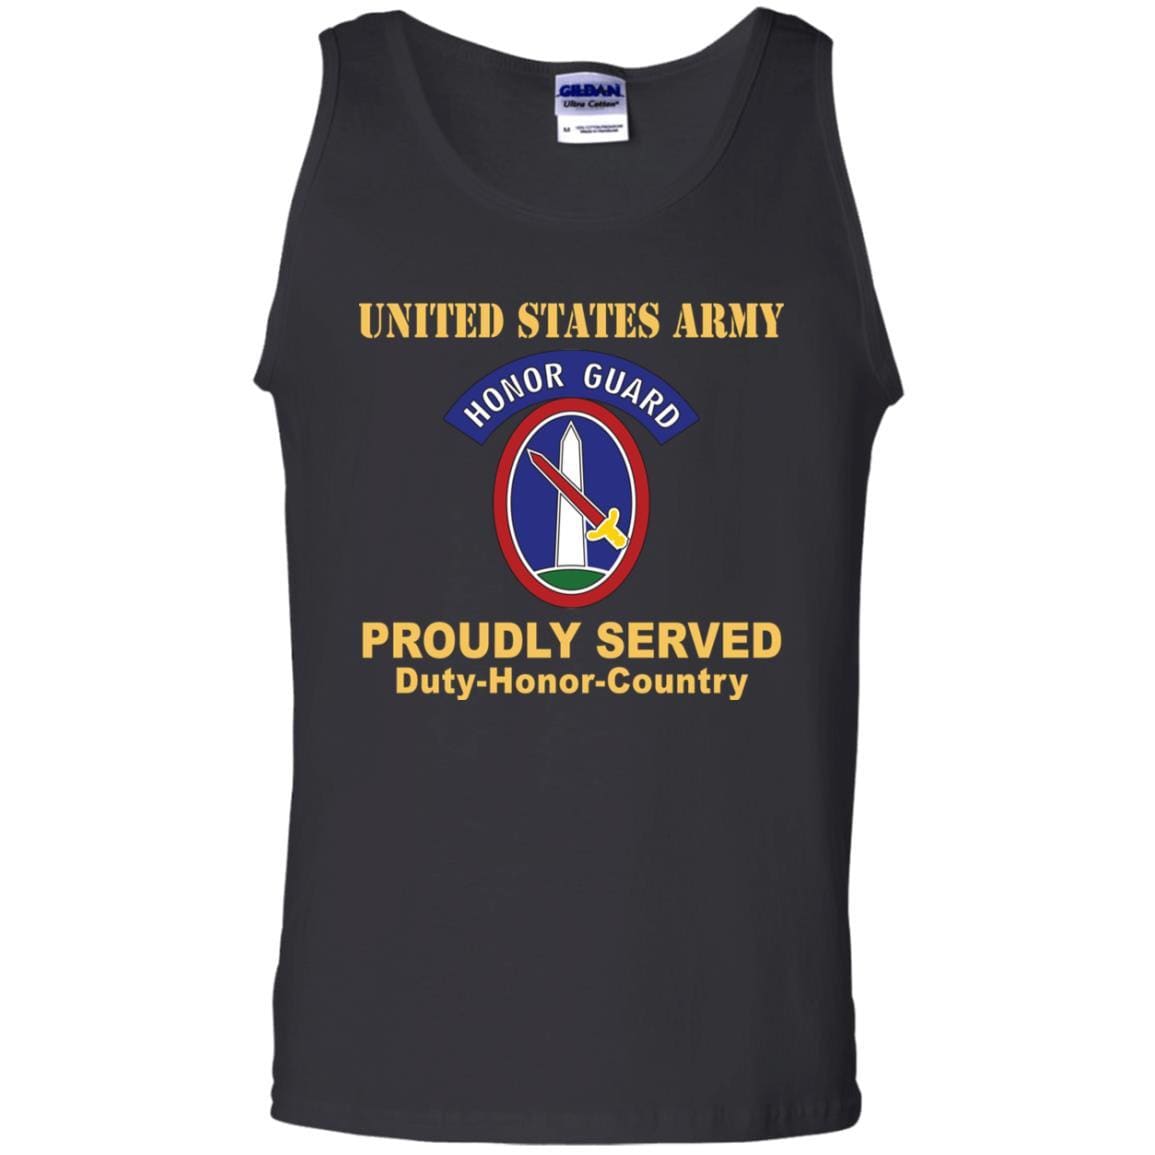 US ARMY 3RD INFANTRY REGIMENT, MILITARY DISTRICT OF WASHINGTON WITH HONOR GUARD TAB- Proudly Served T-Shirt On Front For Men-TShirt-Army-Veterans Nation